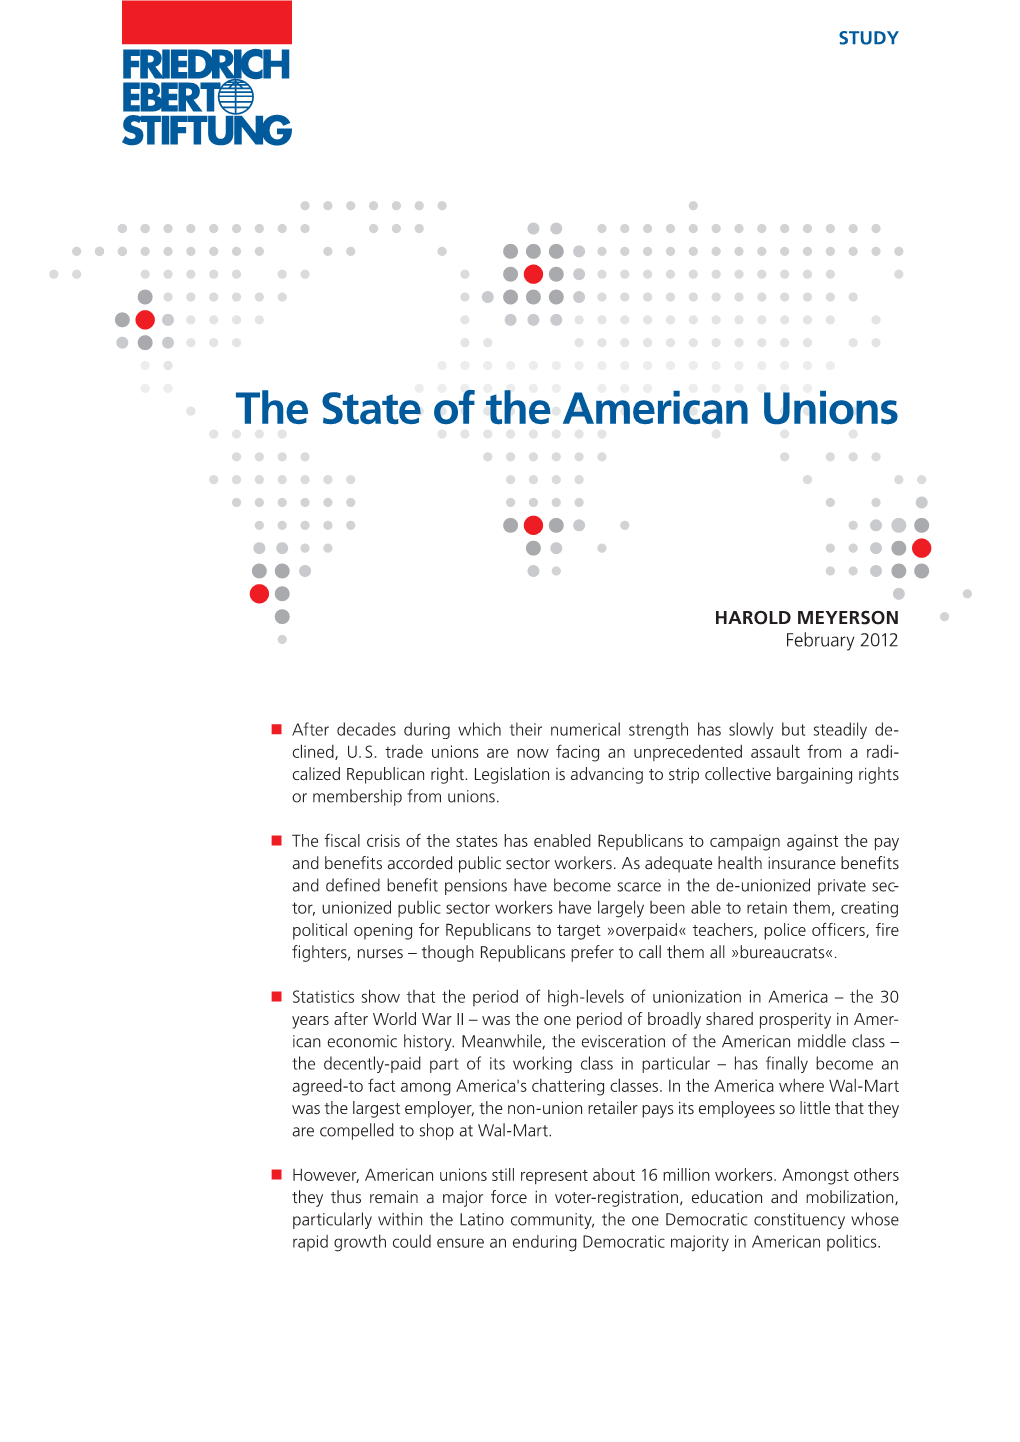 The State of the American Unions